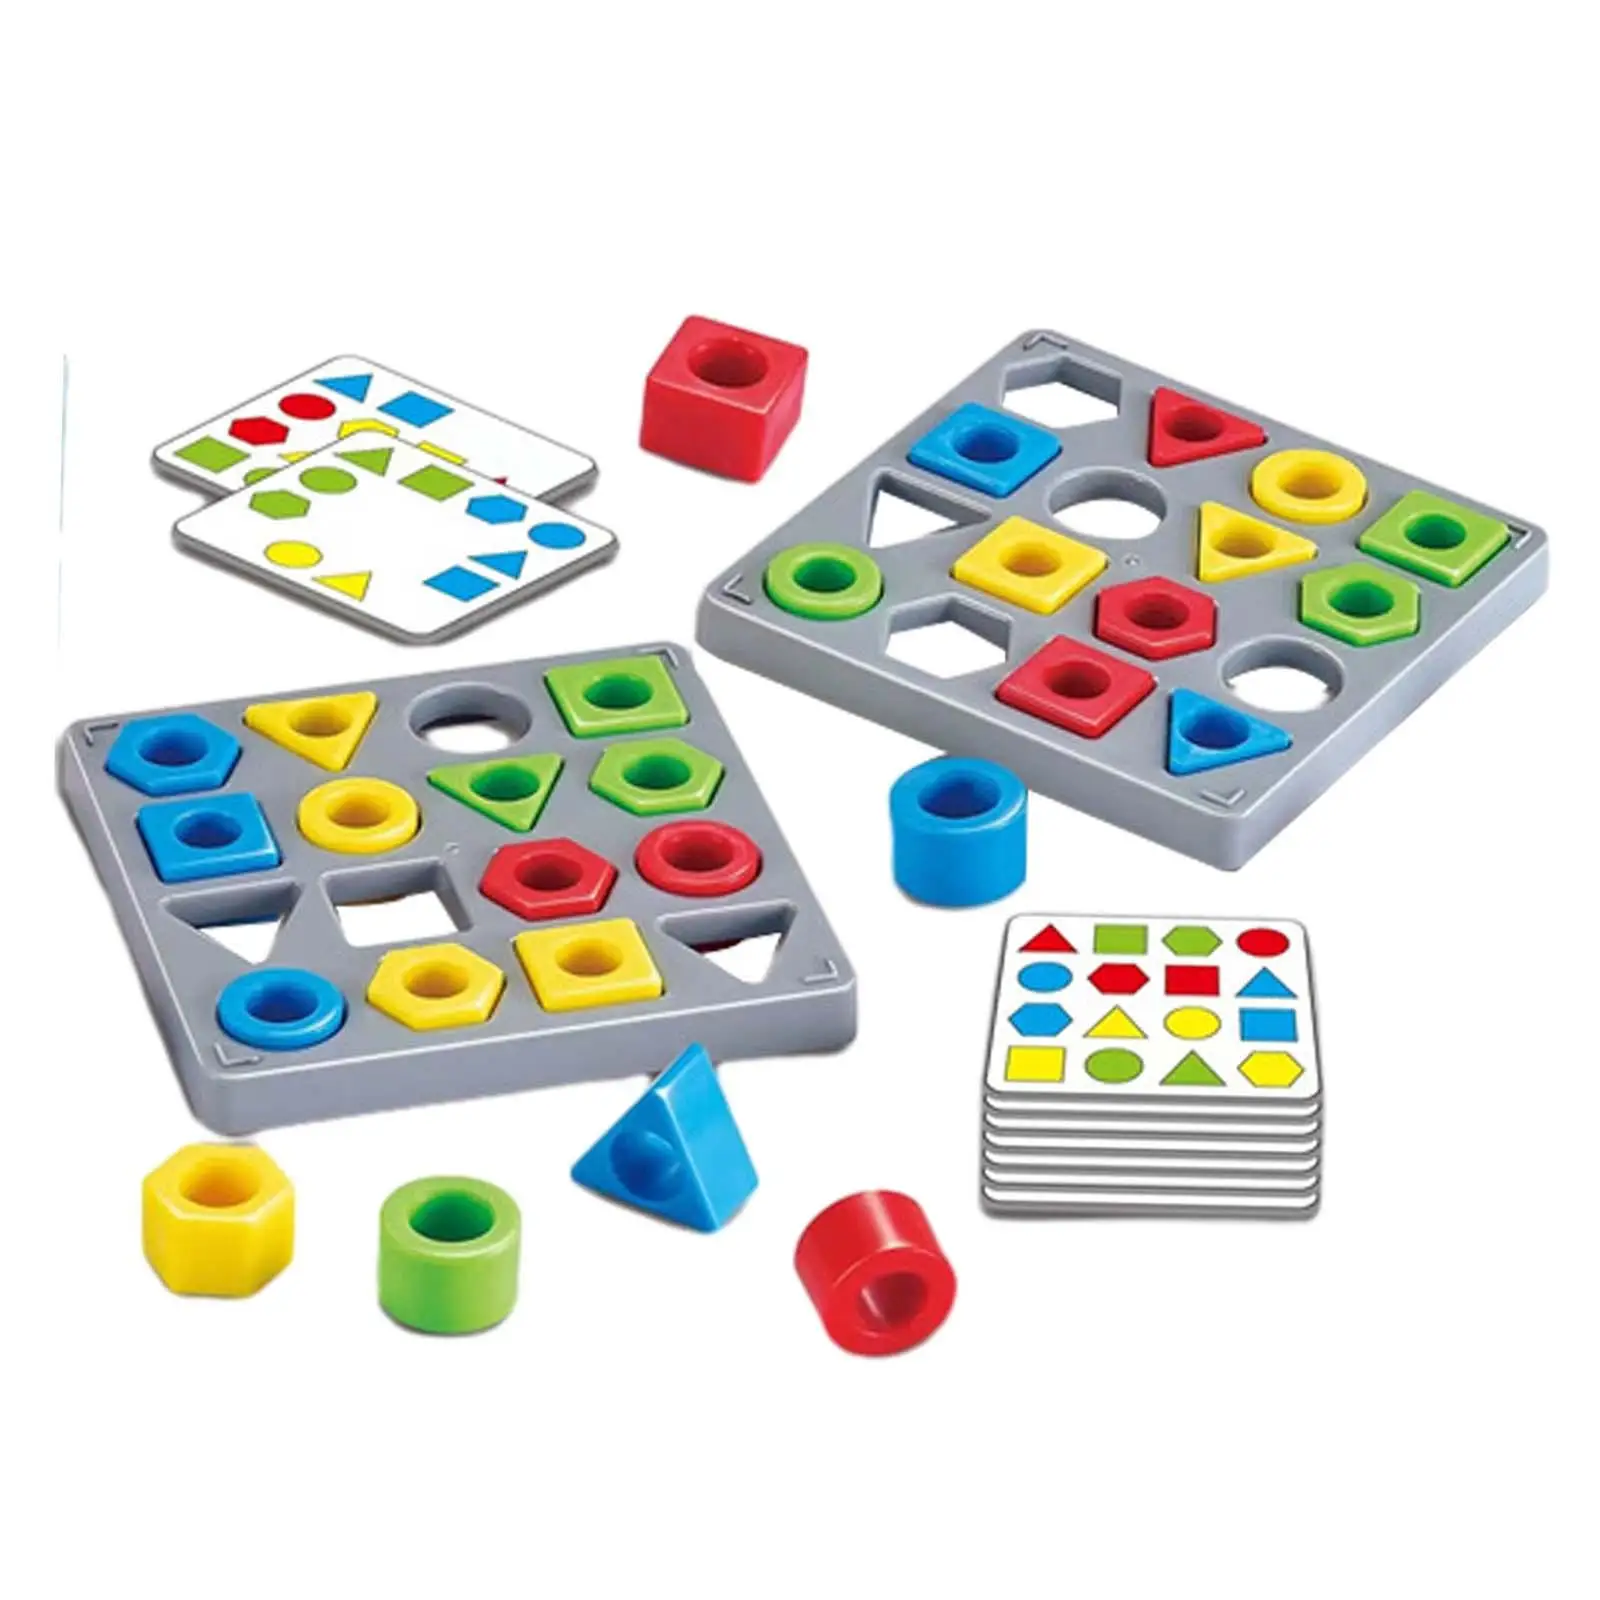 Color Sensory Educational Toy Shape Matching Game Color Learning Board Game for Kids 2 Players Toddlers Children 3-6 Years Old